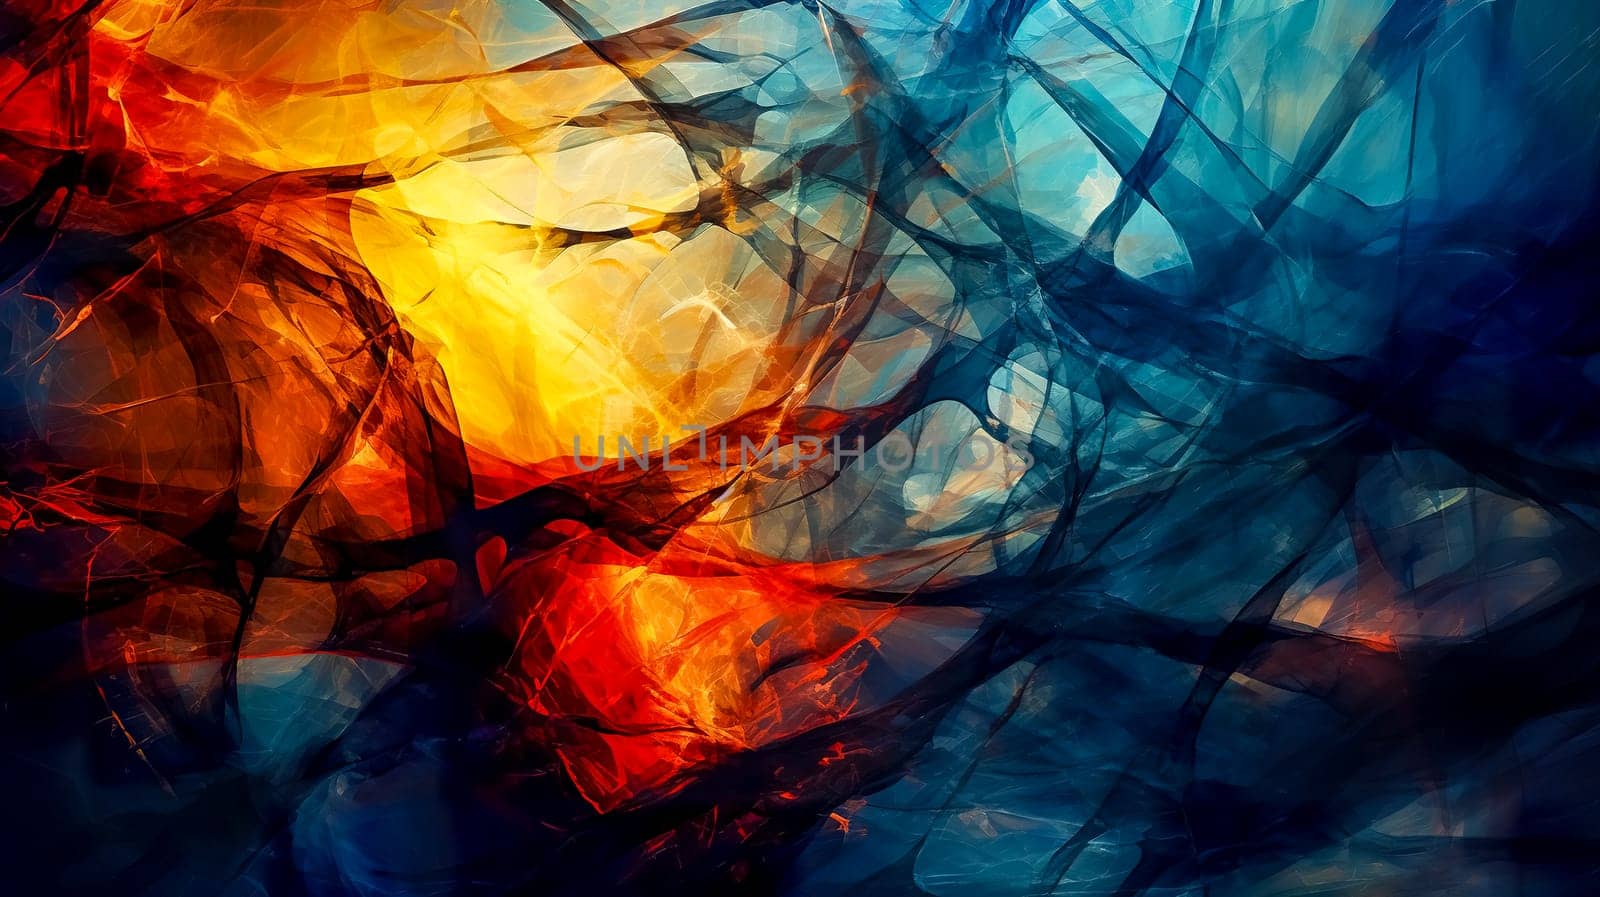 Abstract digital artwork with chaotic swirls of blue and orange